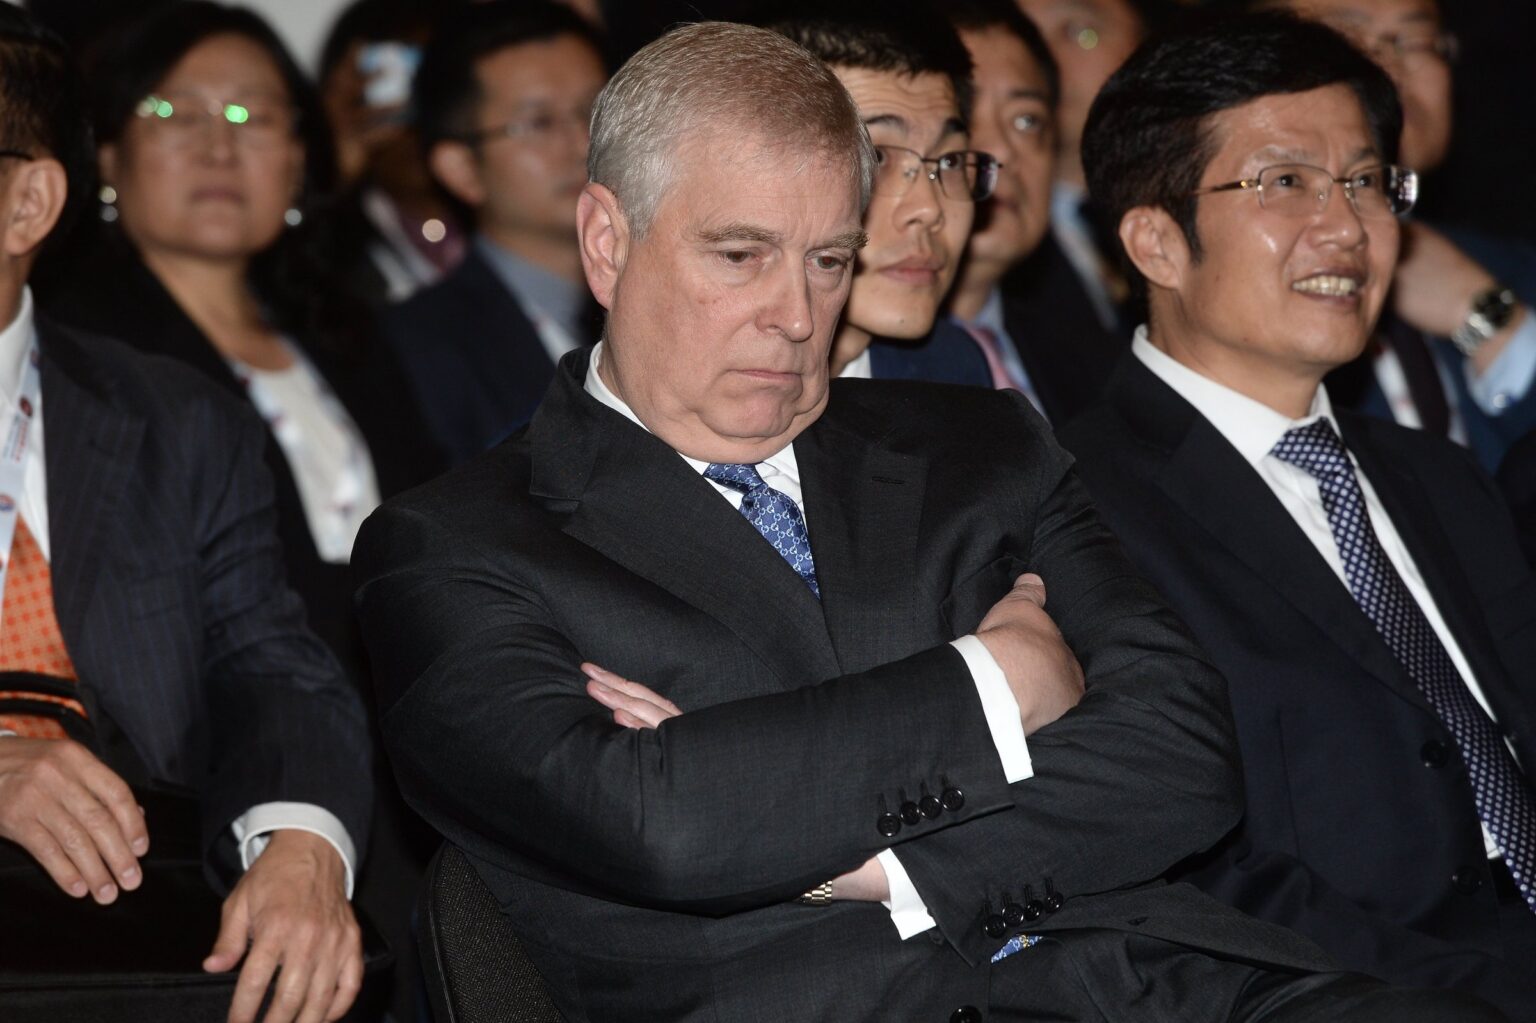 How is Prince Andrew connected to Jeffrey Epstein? Will the Duke of York return to royal duties? Here’s everything you need to know.